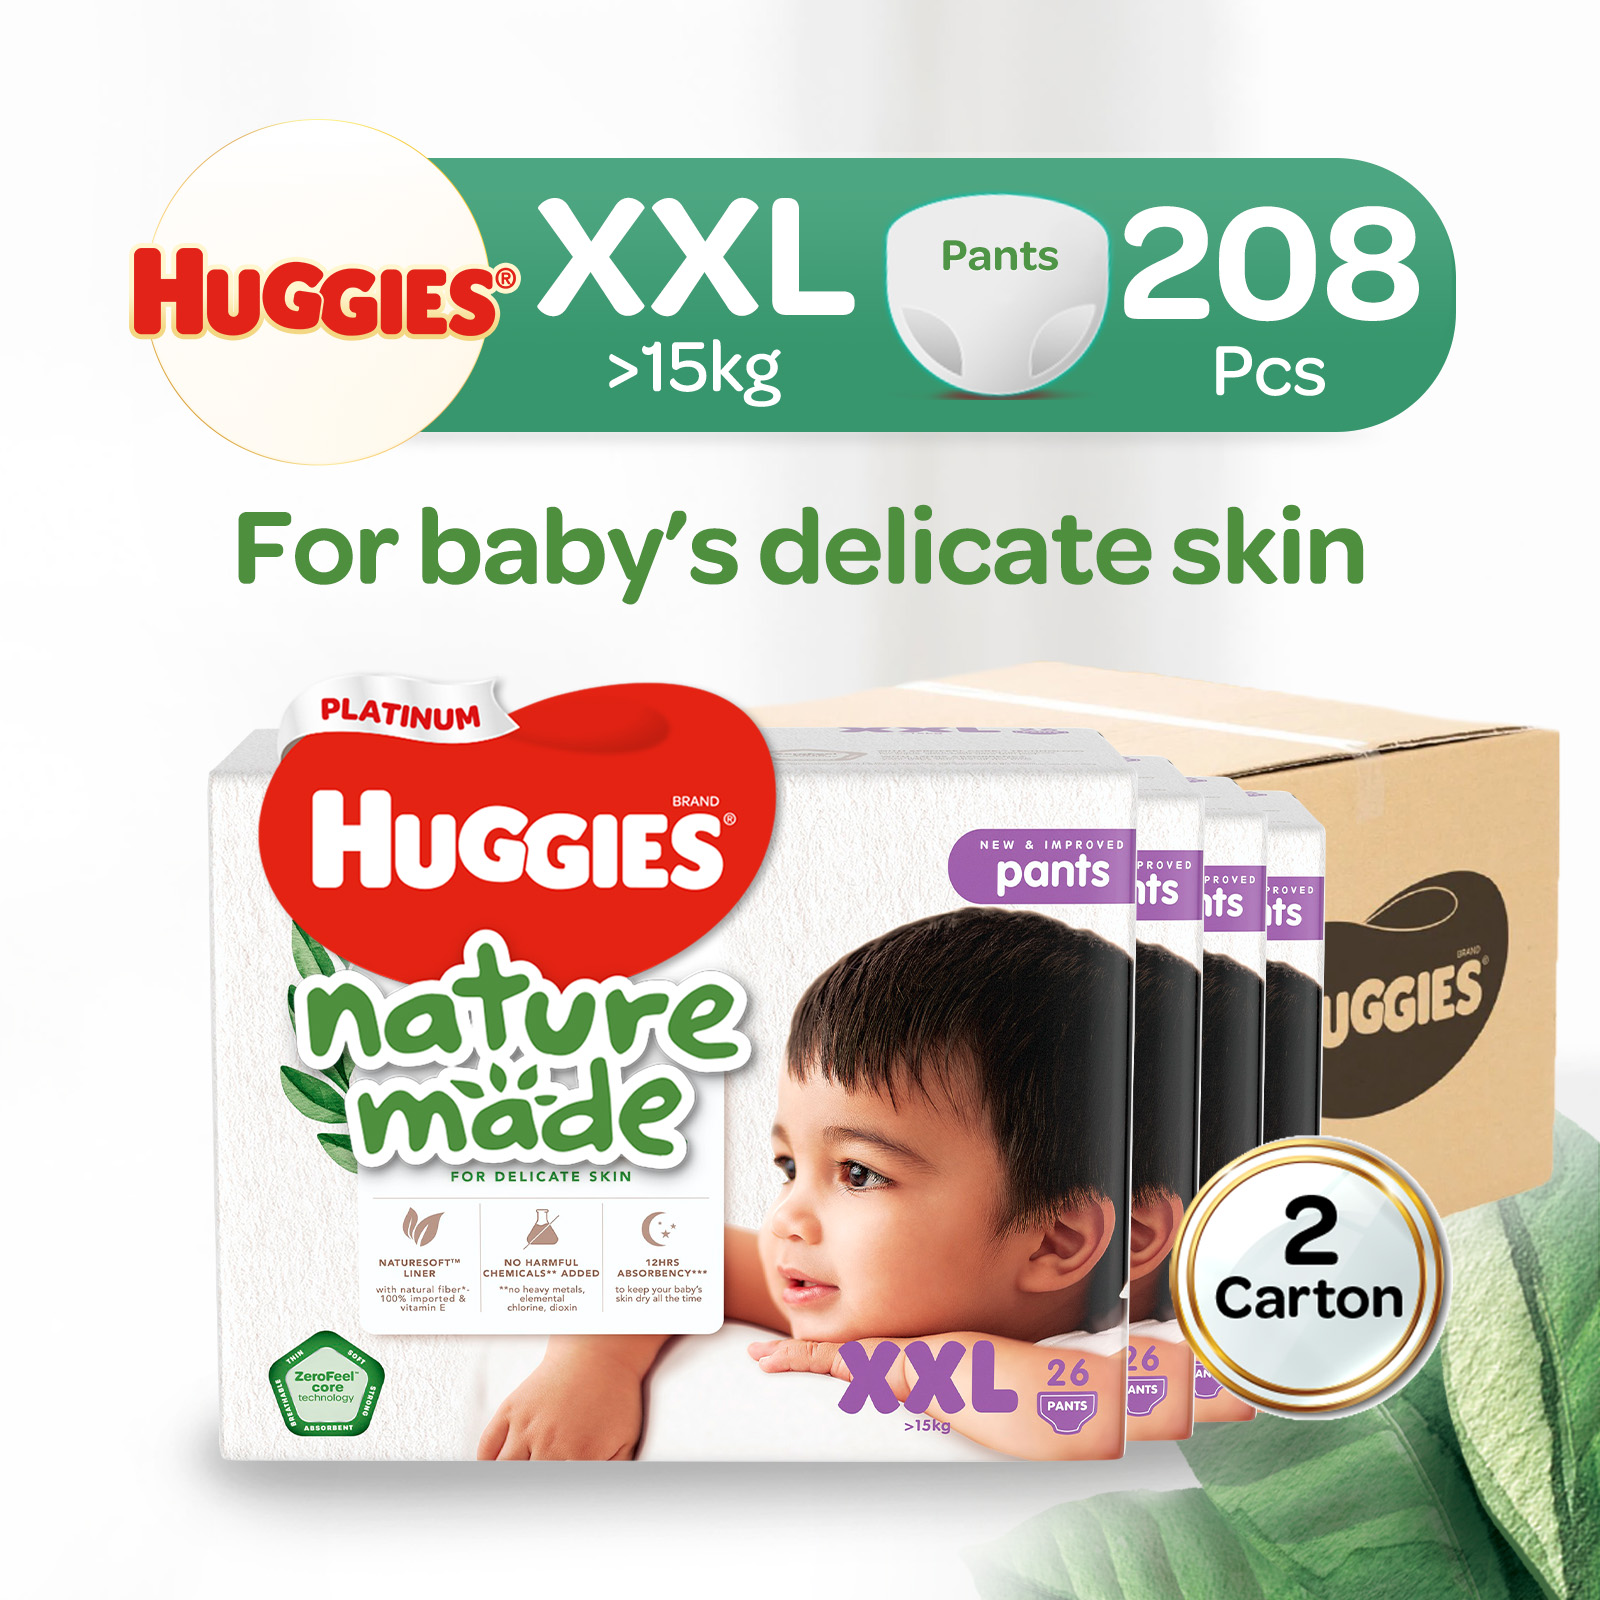 Buy Huggies Complete Comfort Dry Pants Medium (M) Size Baby Diaper Pants,  26 count, with 5 in 1 Comfort Online at Low Prices in India - Amazon.in